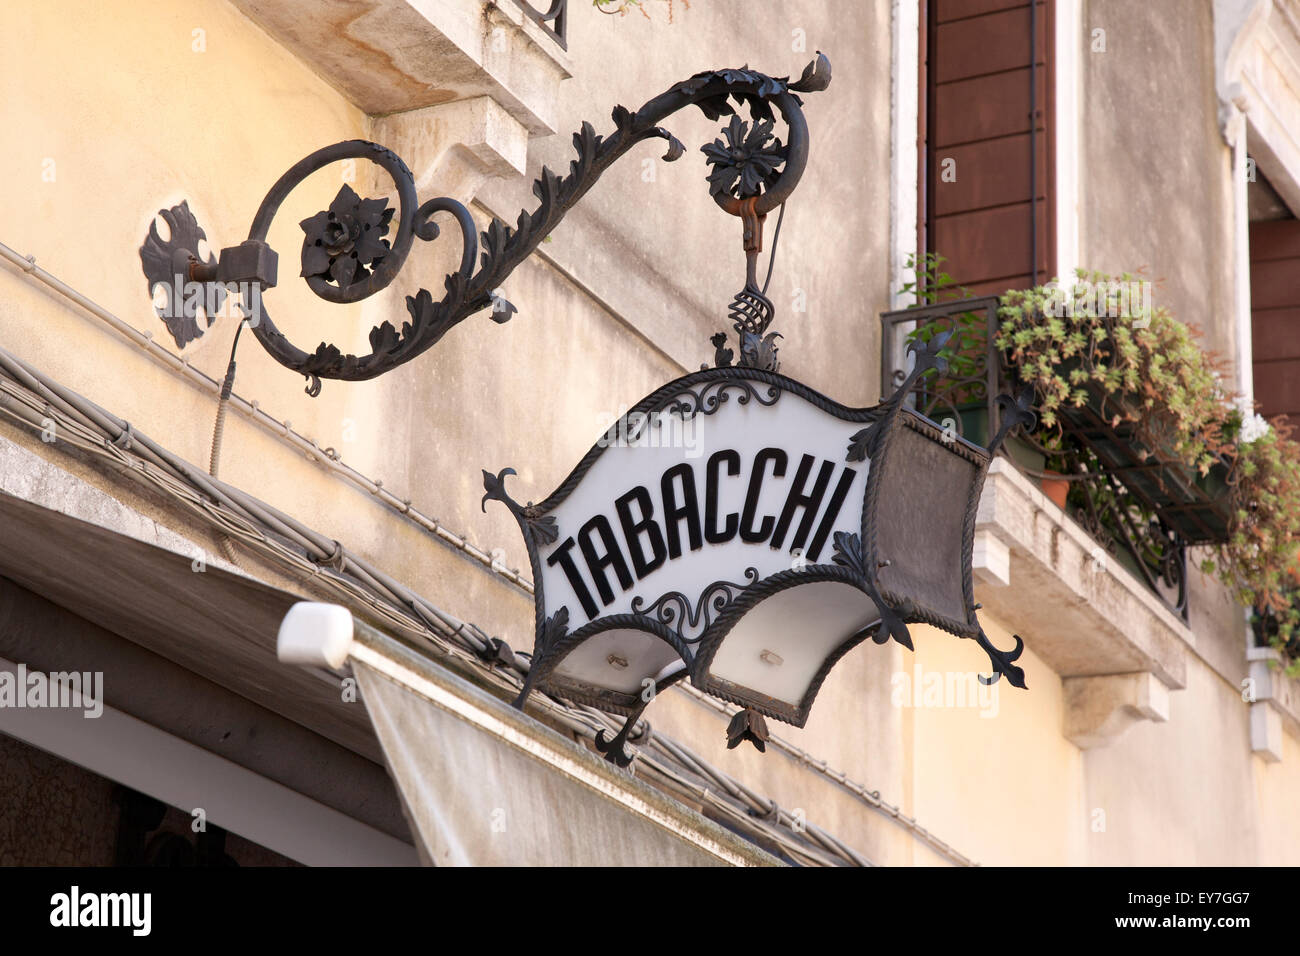 Tobacconist - Tabacchi Sign, Venice, Italy Stock Photo